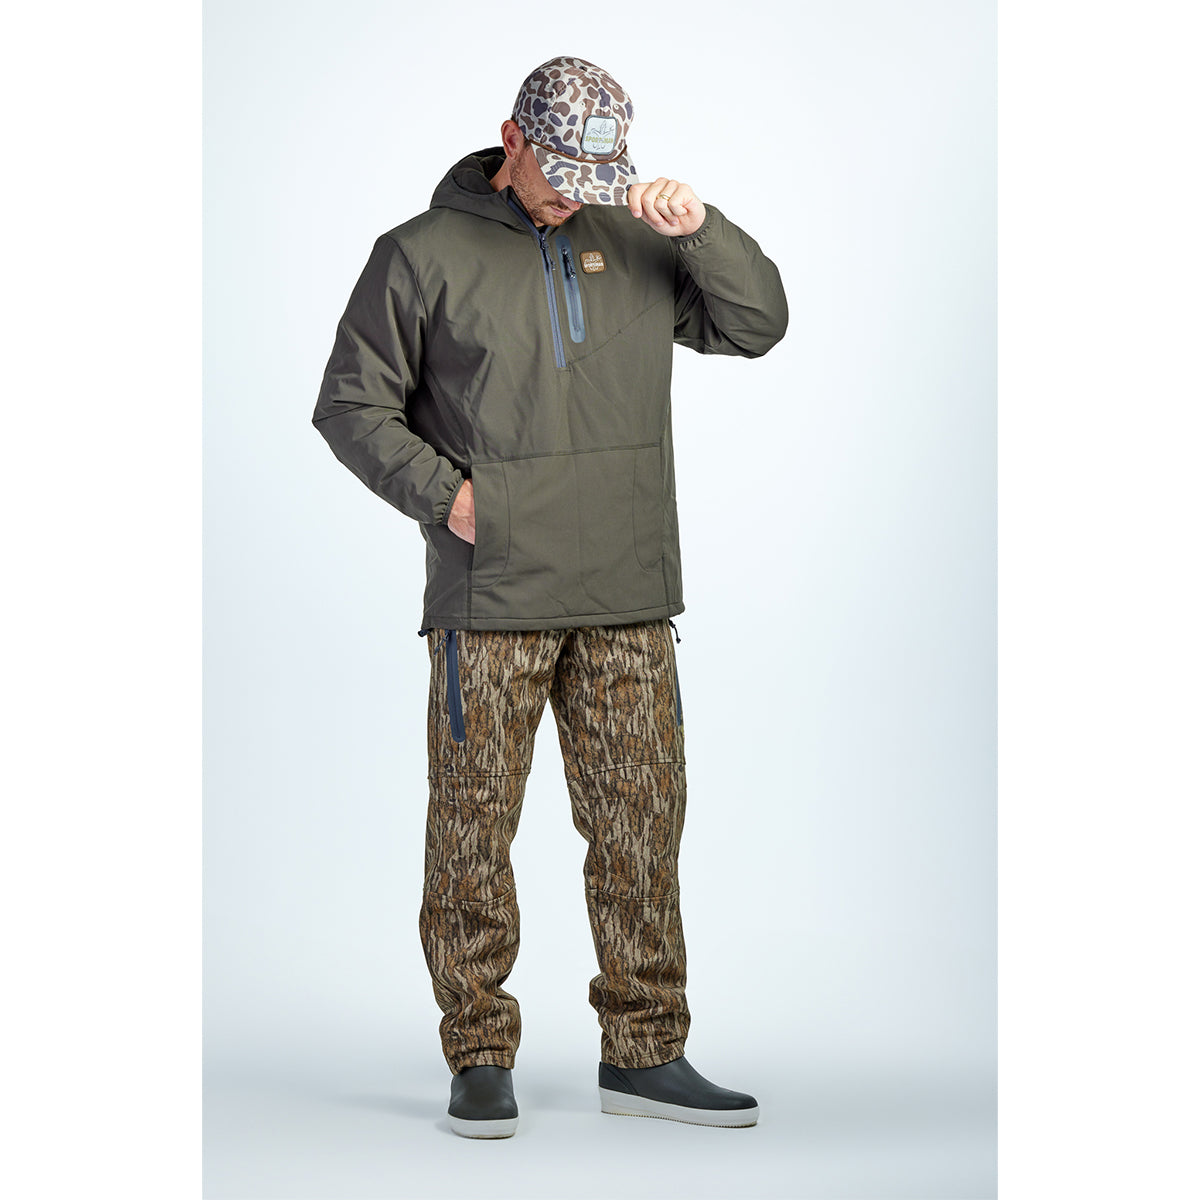 Sportsman W3i Insulated Water and Wind Resistant Hunting & Fishing Hoodie 2x / Cypress